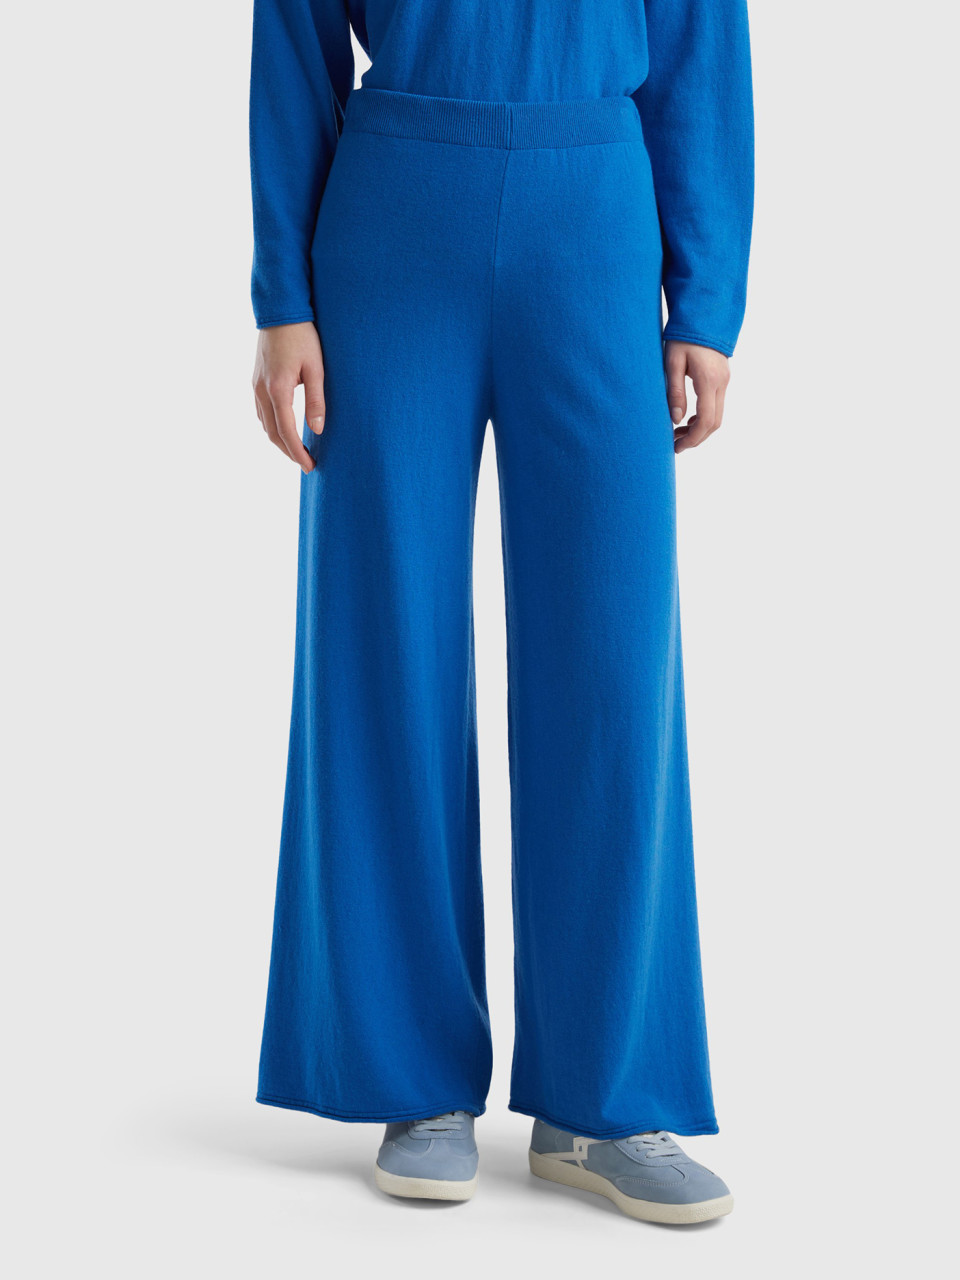 Benetton, Blue Wide Trousers In Cashmere And Wool Blend, Blue, Women